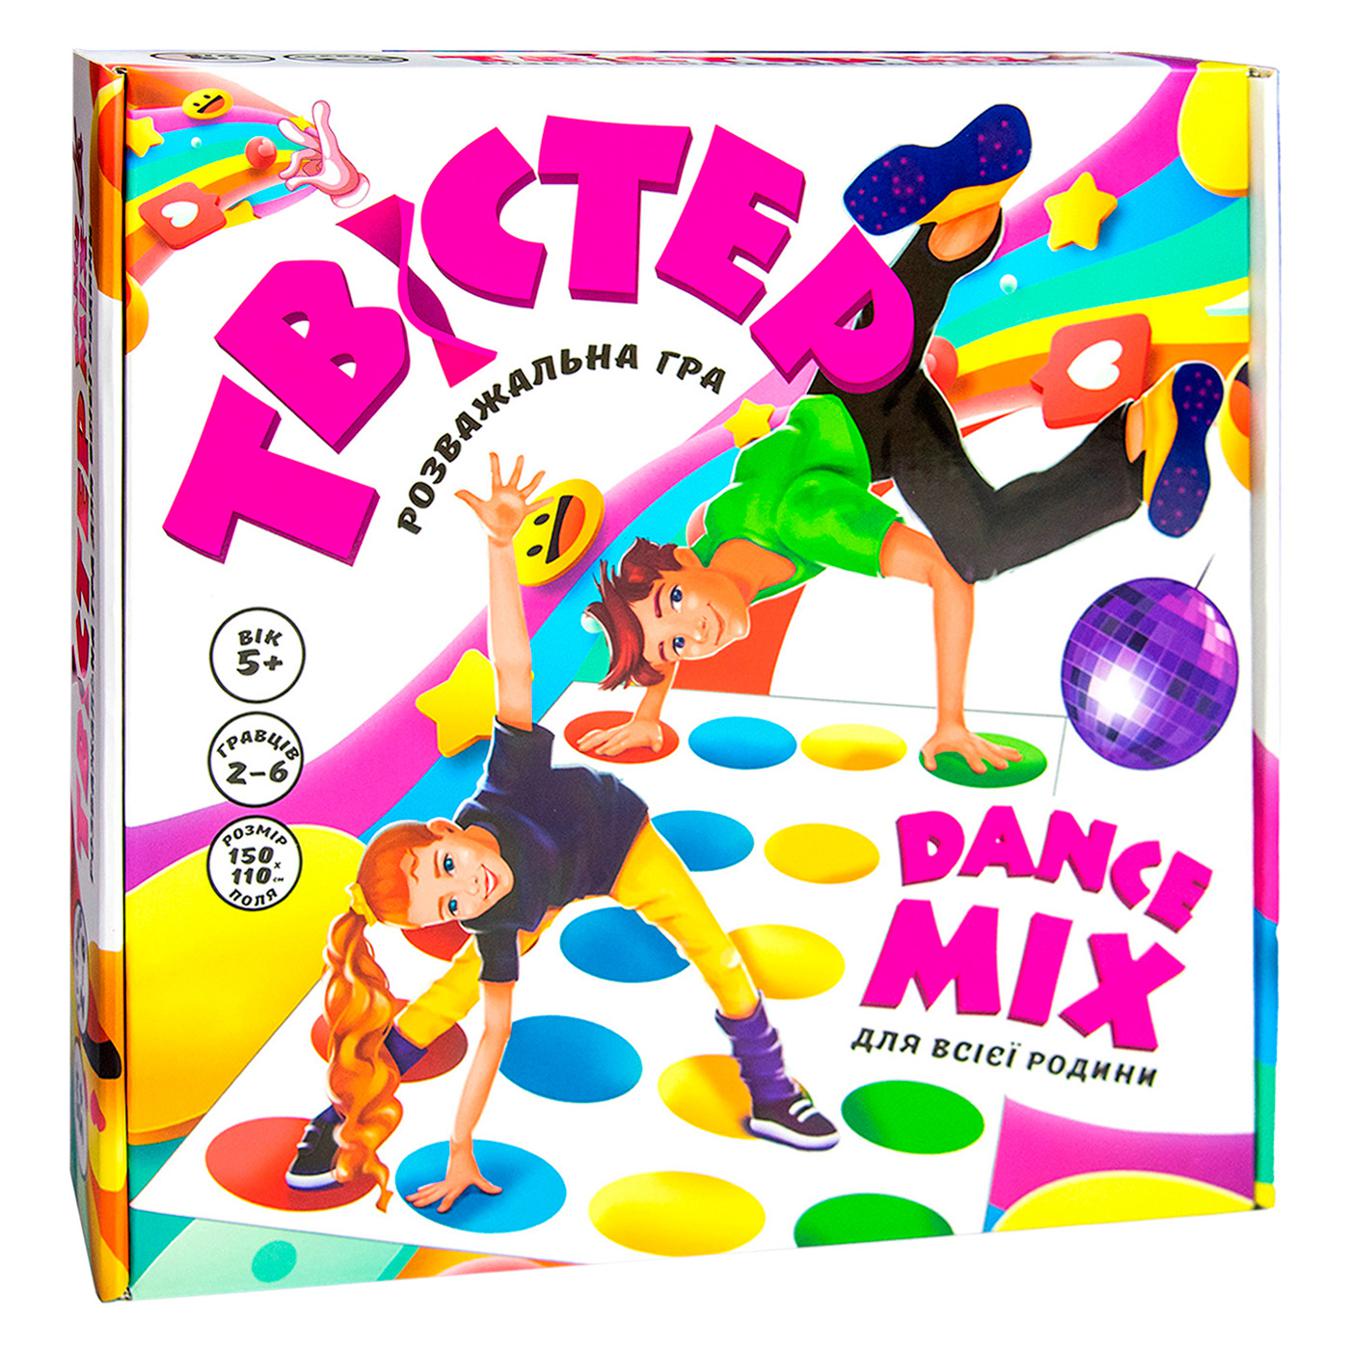 Entertainment game Strateg, Twister dance mix, in a box 25*25.5*5.3cm